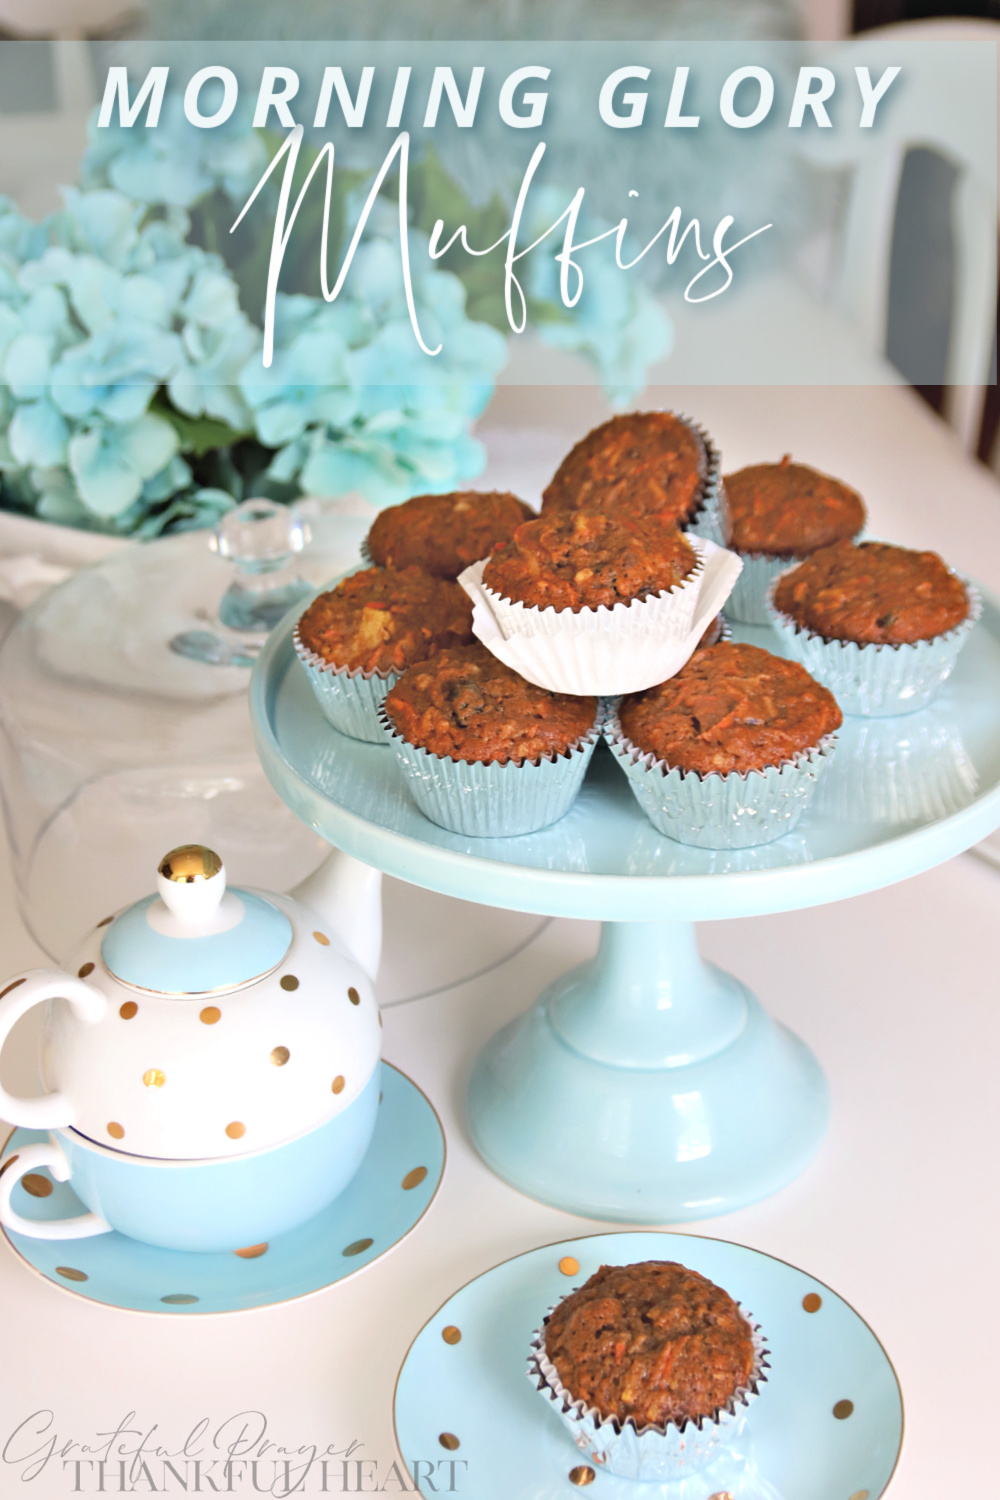 Morning glory muffins, with healthy ingredients like carrots, apple, pineapple, coconut, raisins and pecans for a delicious snack.